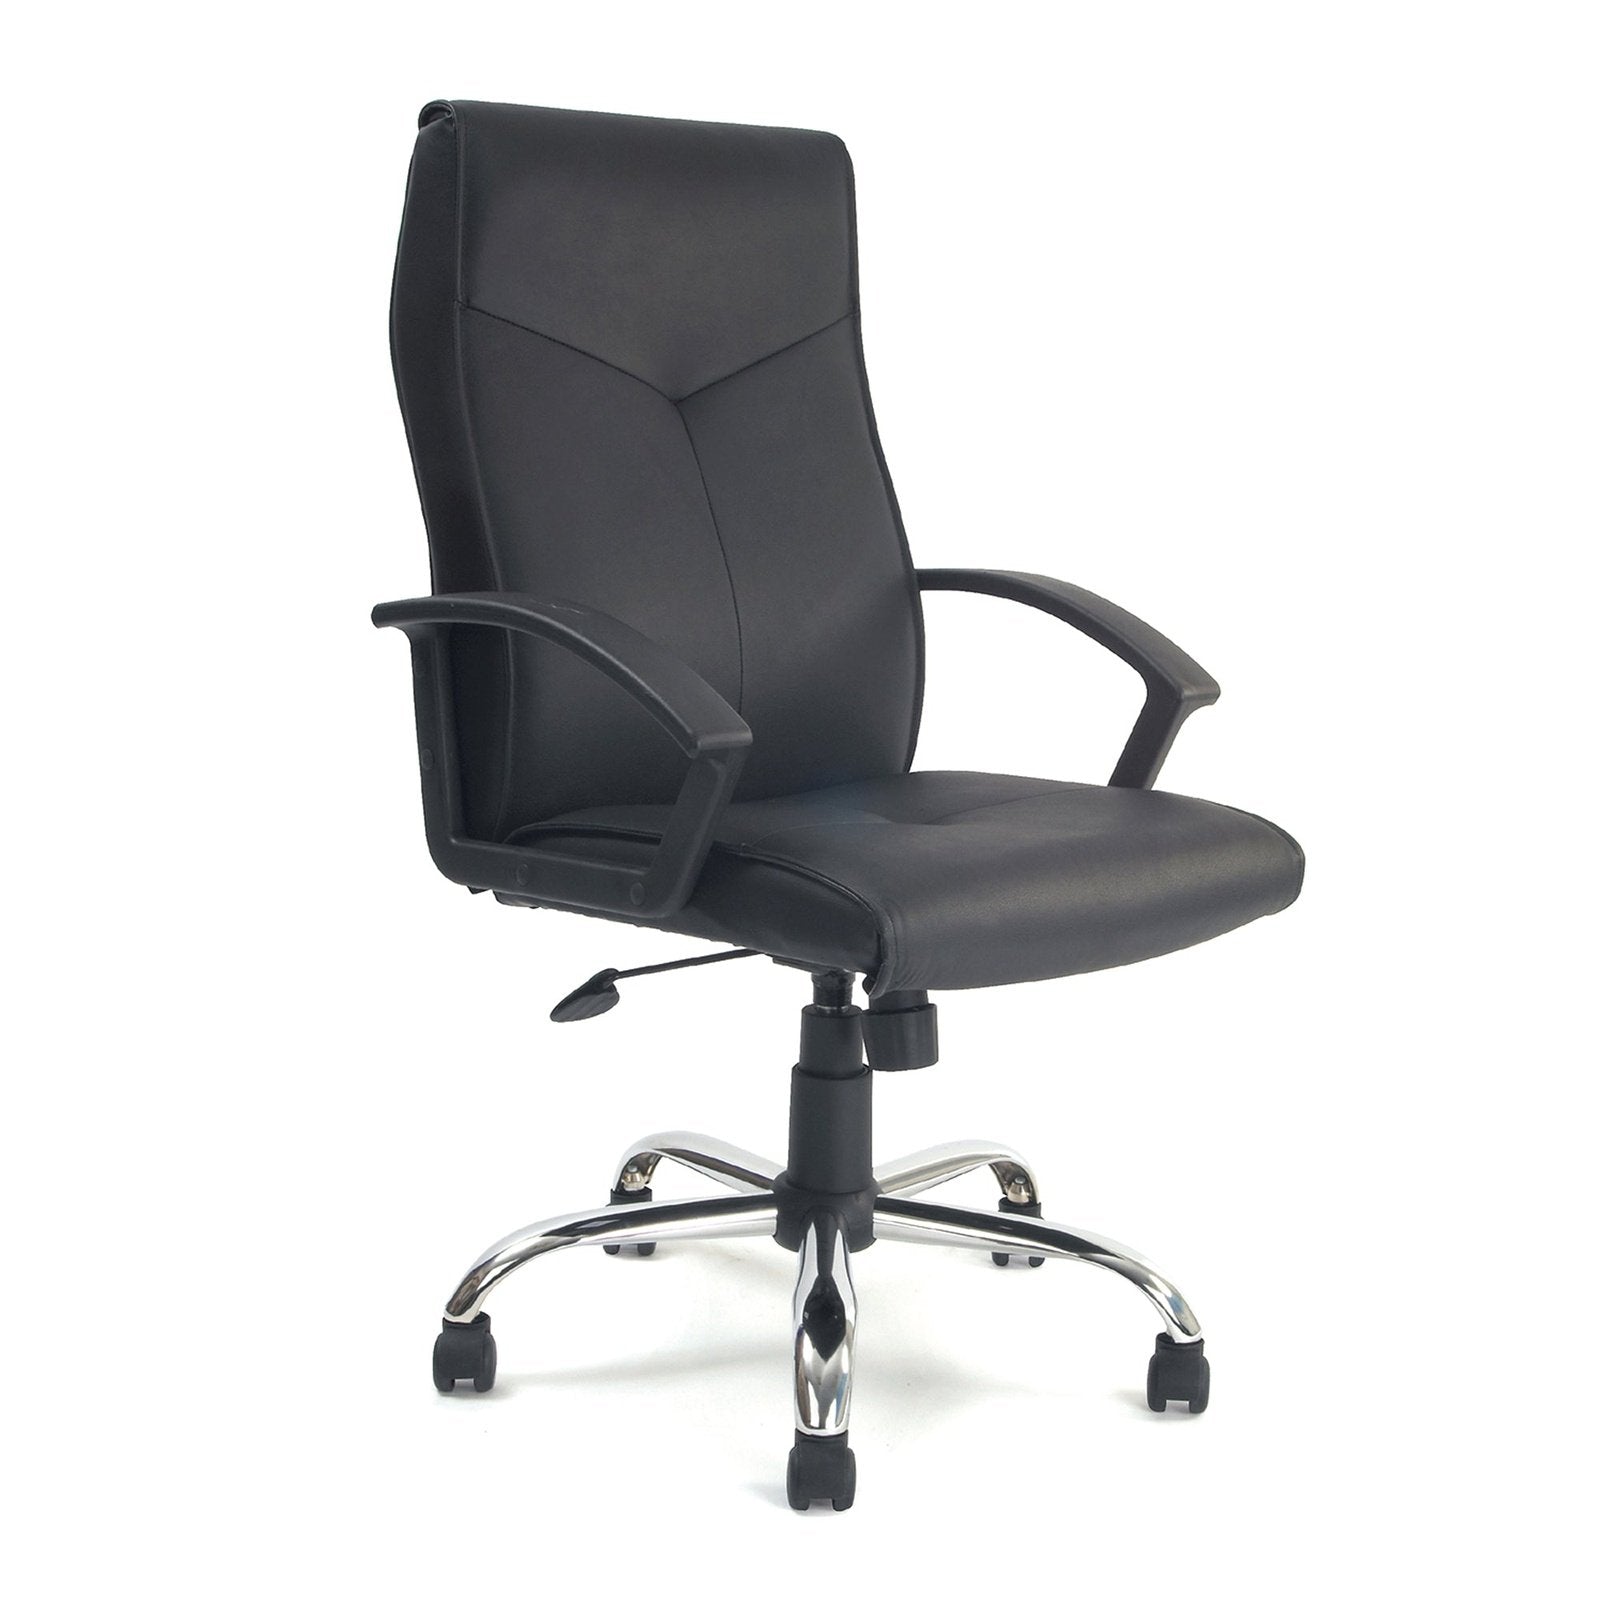 High Back Leather Faced Executive Armchair with Chrome Base - Black - Office Products Online